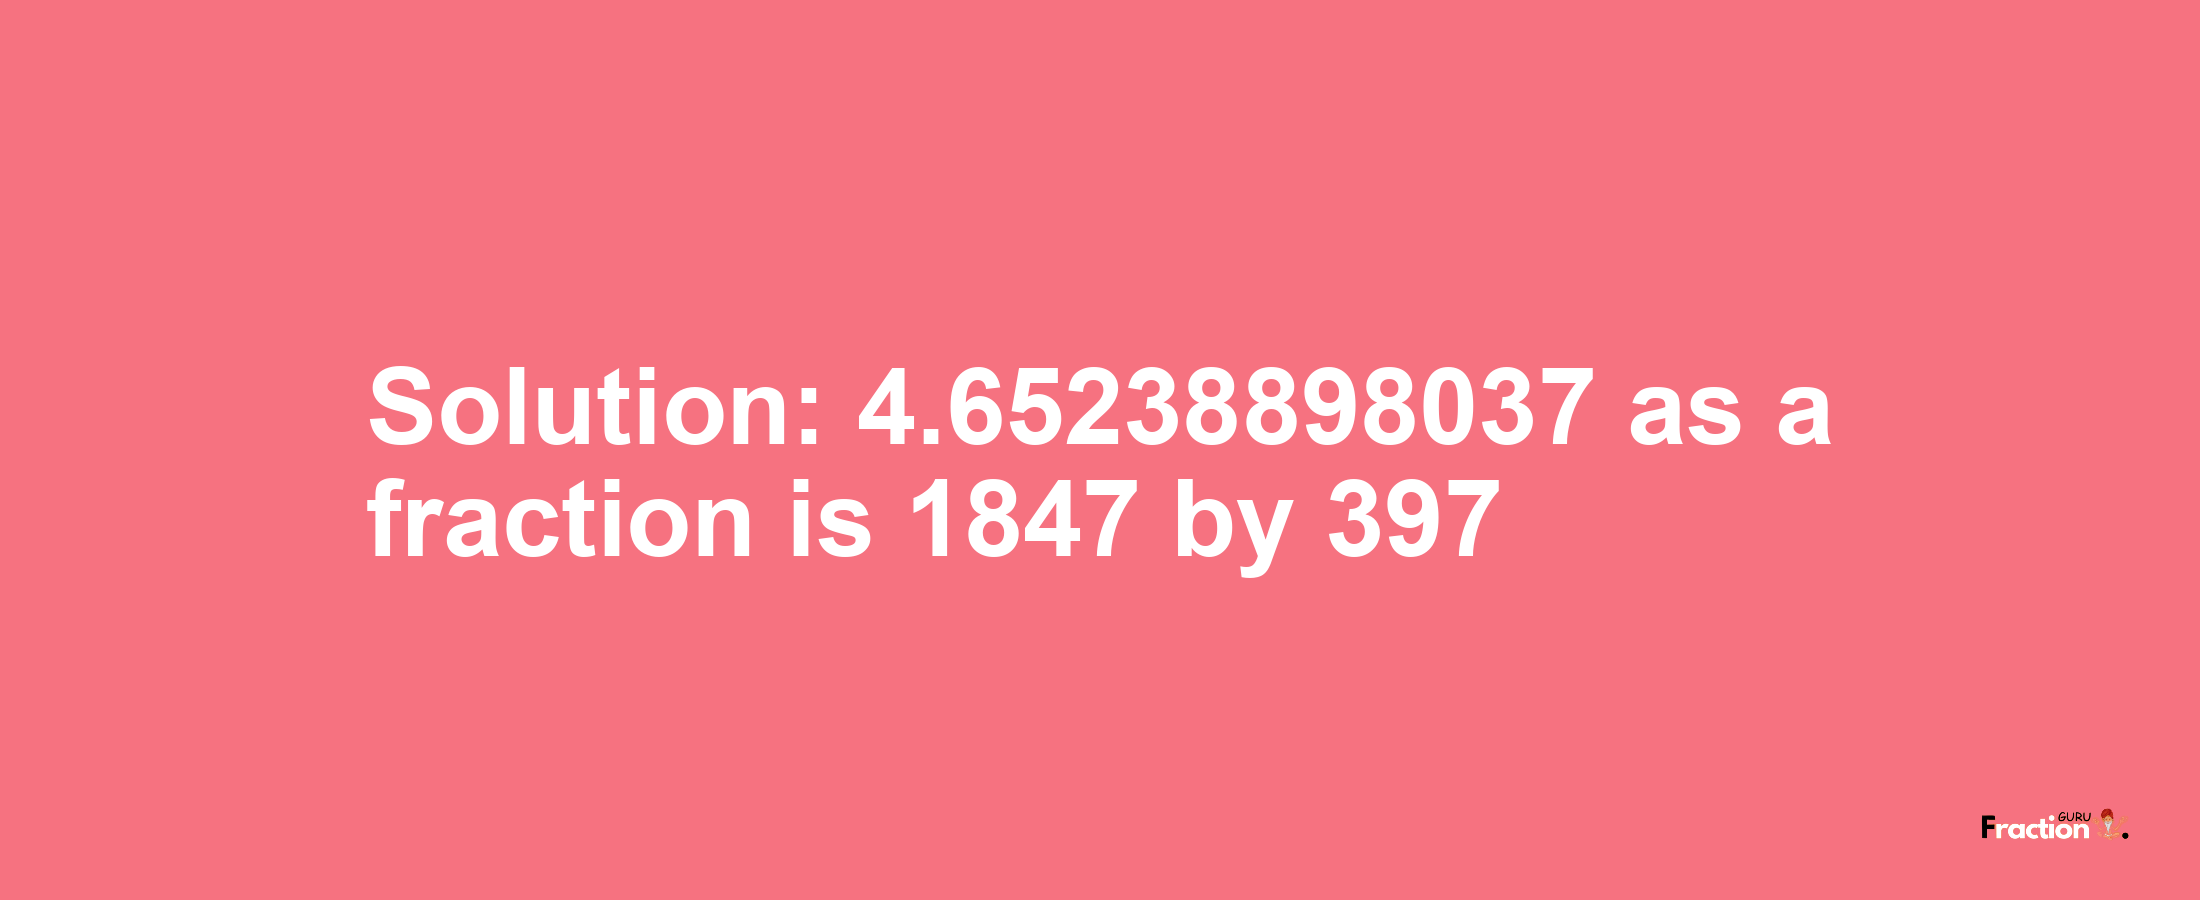 Solution:4.65238898037 as a fraction is 1847/397